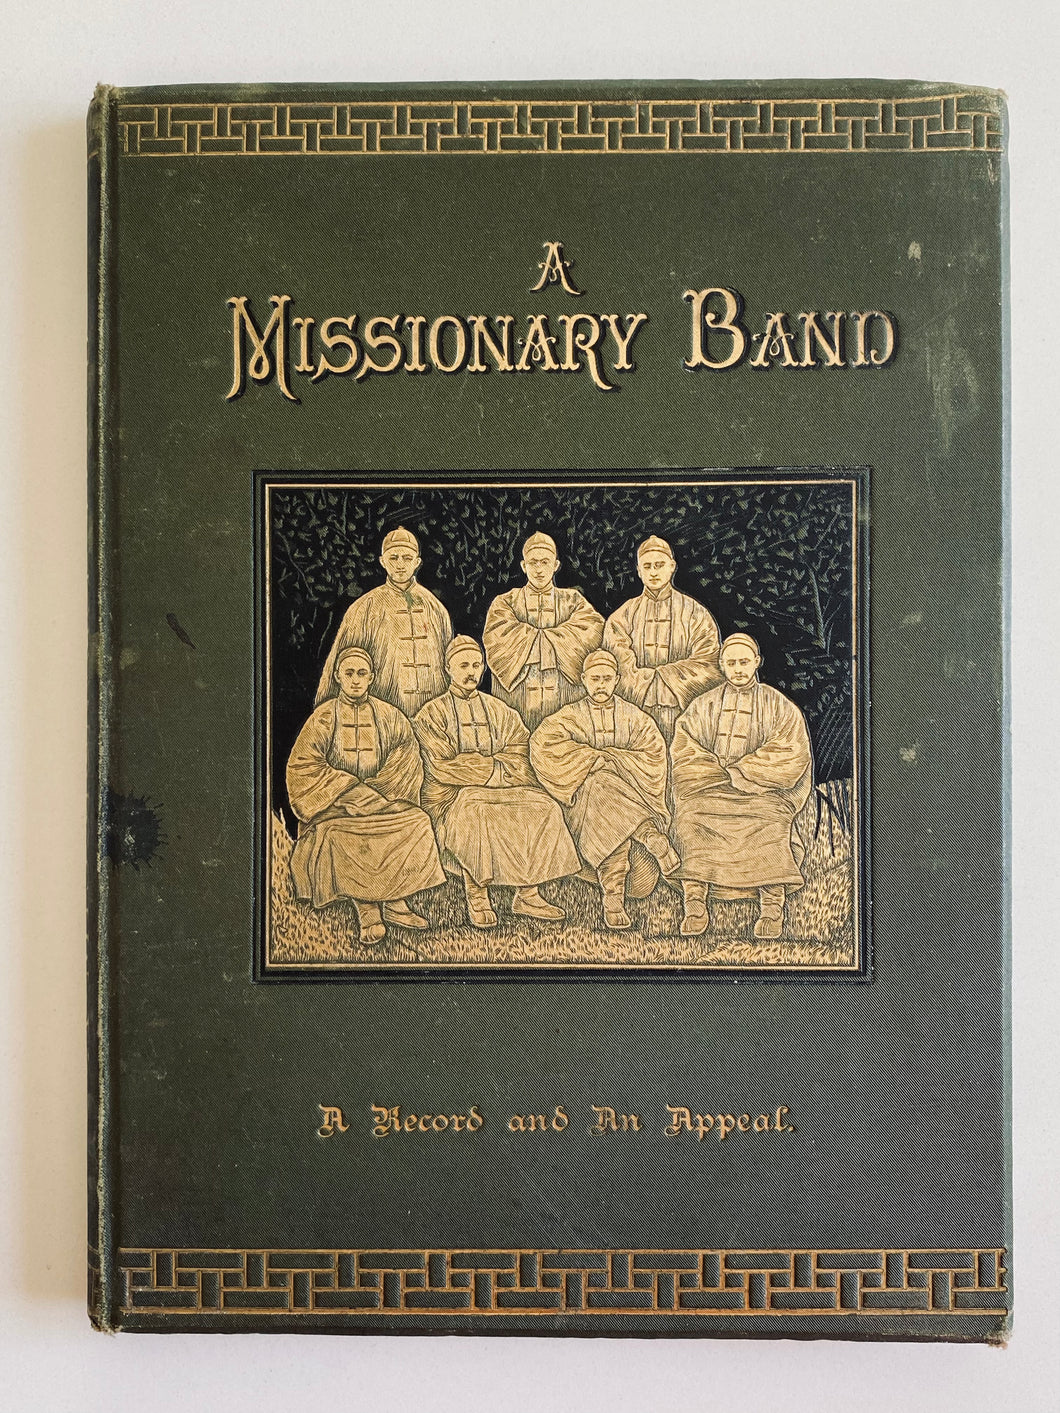 1886 HUDSON TAYLOR. A Missionary Band. First Edition History of the Cambridge Seven!